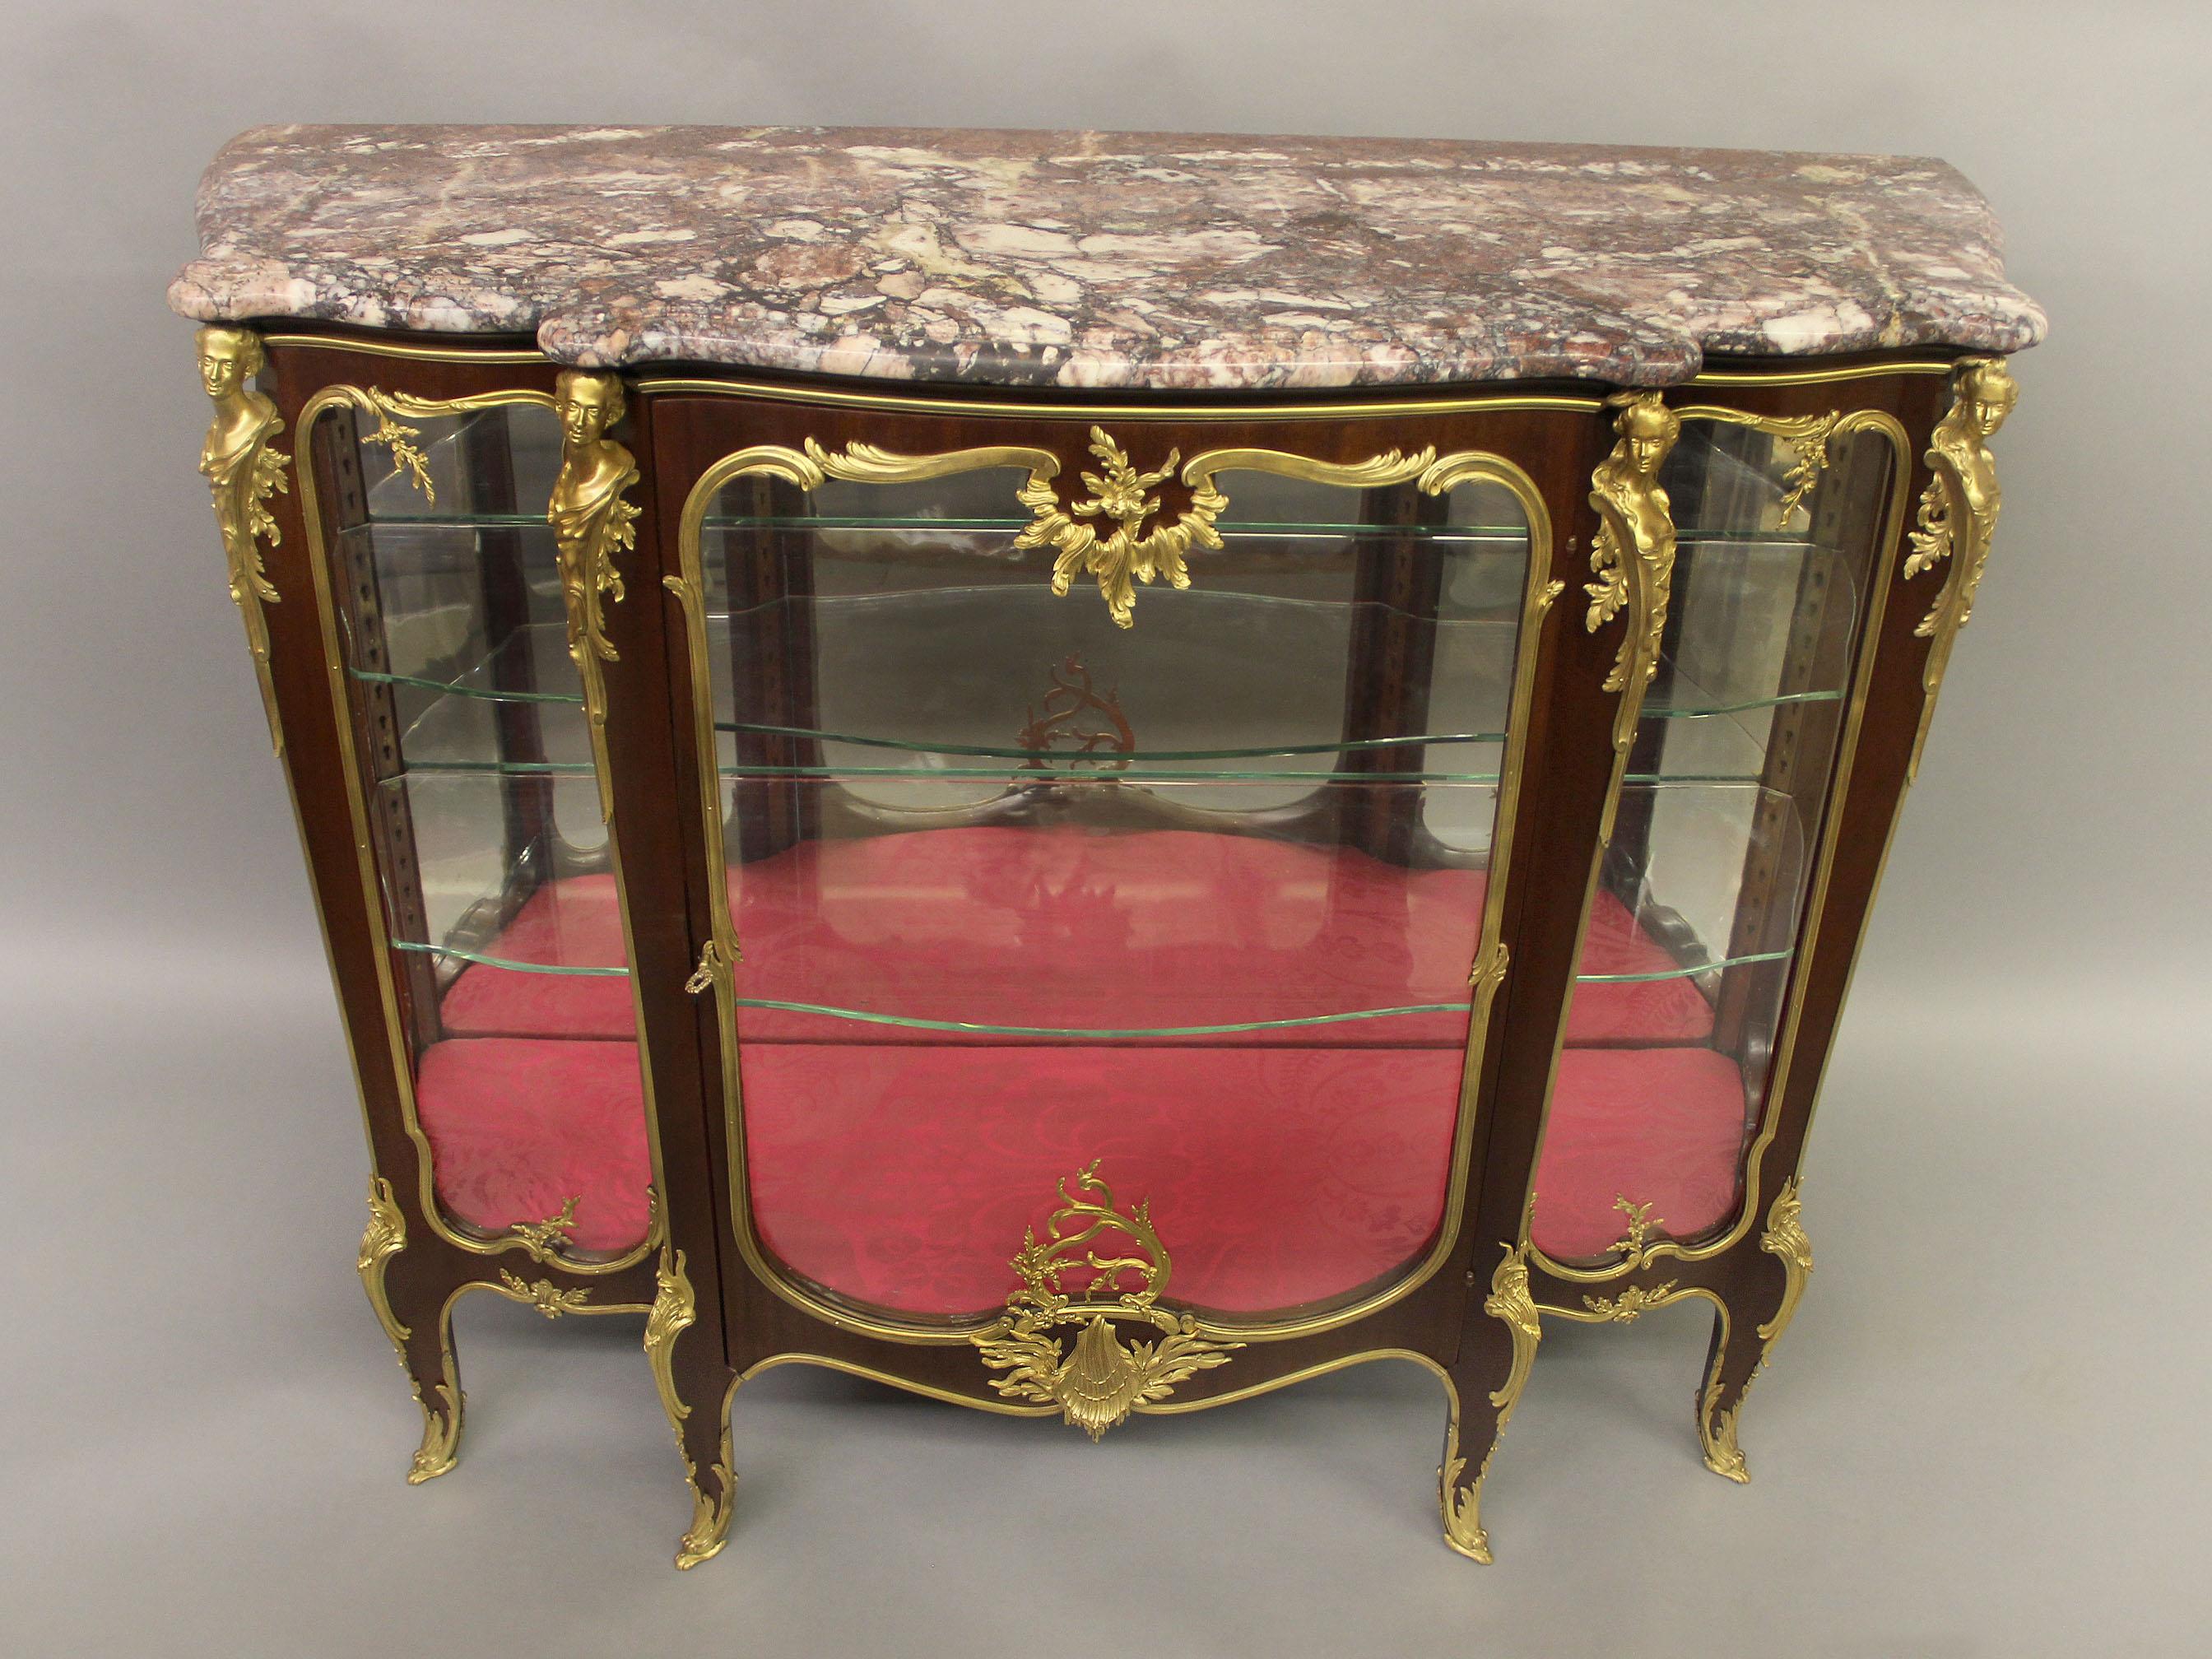 An exceptional Late 19th century Louis XV style gilt bronze mounted mahogany vitrine

By François Linke

A shaped marble top above a single central glazed door opening to a shelved interior flanked by two glass panels, the centered door with a